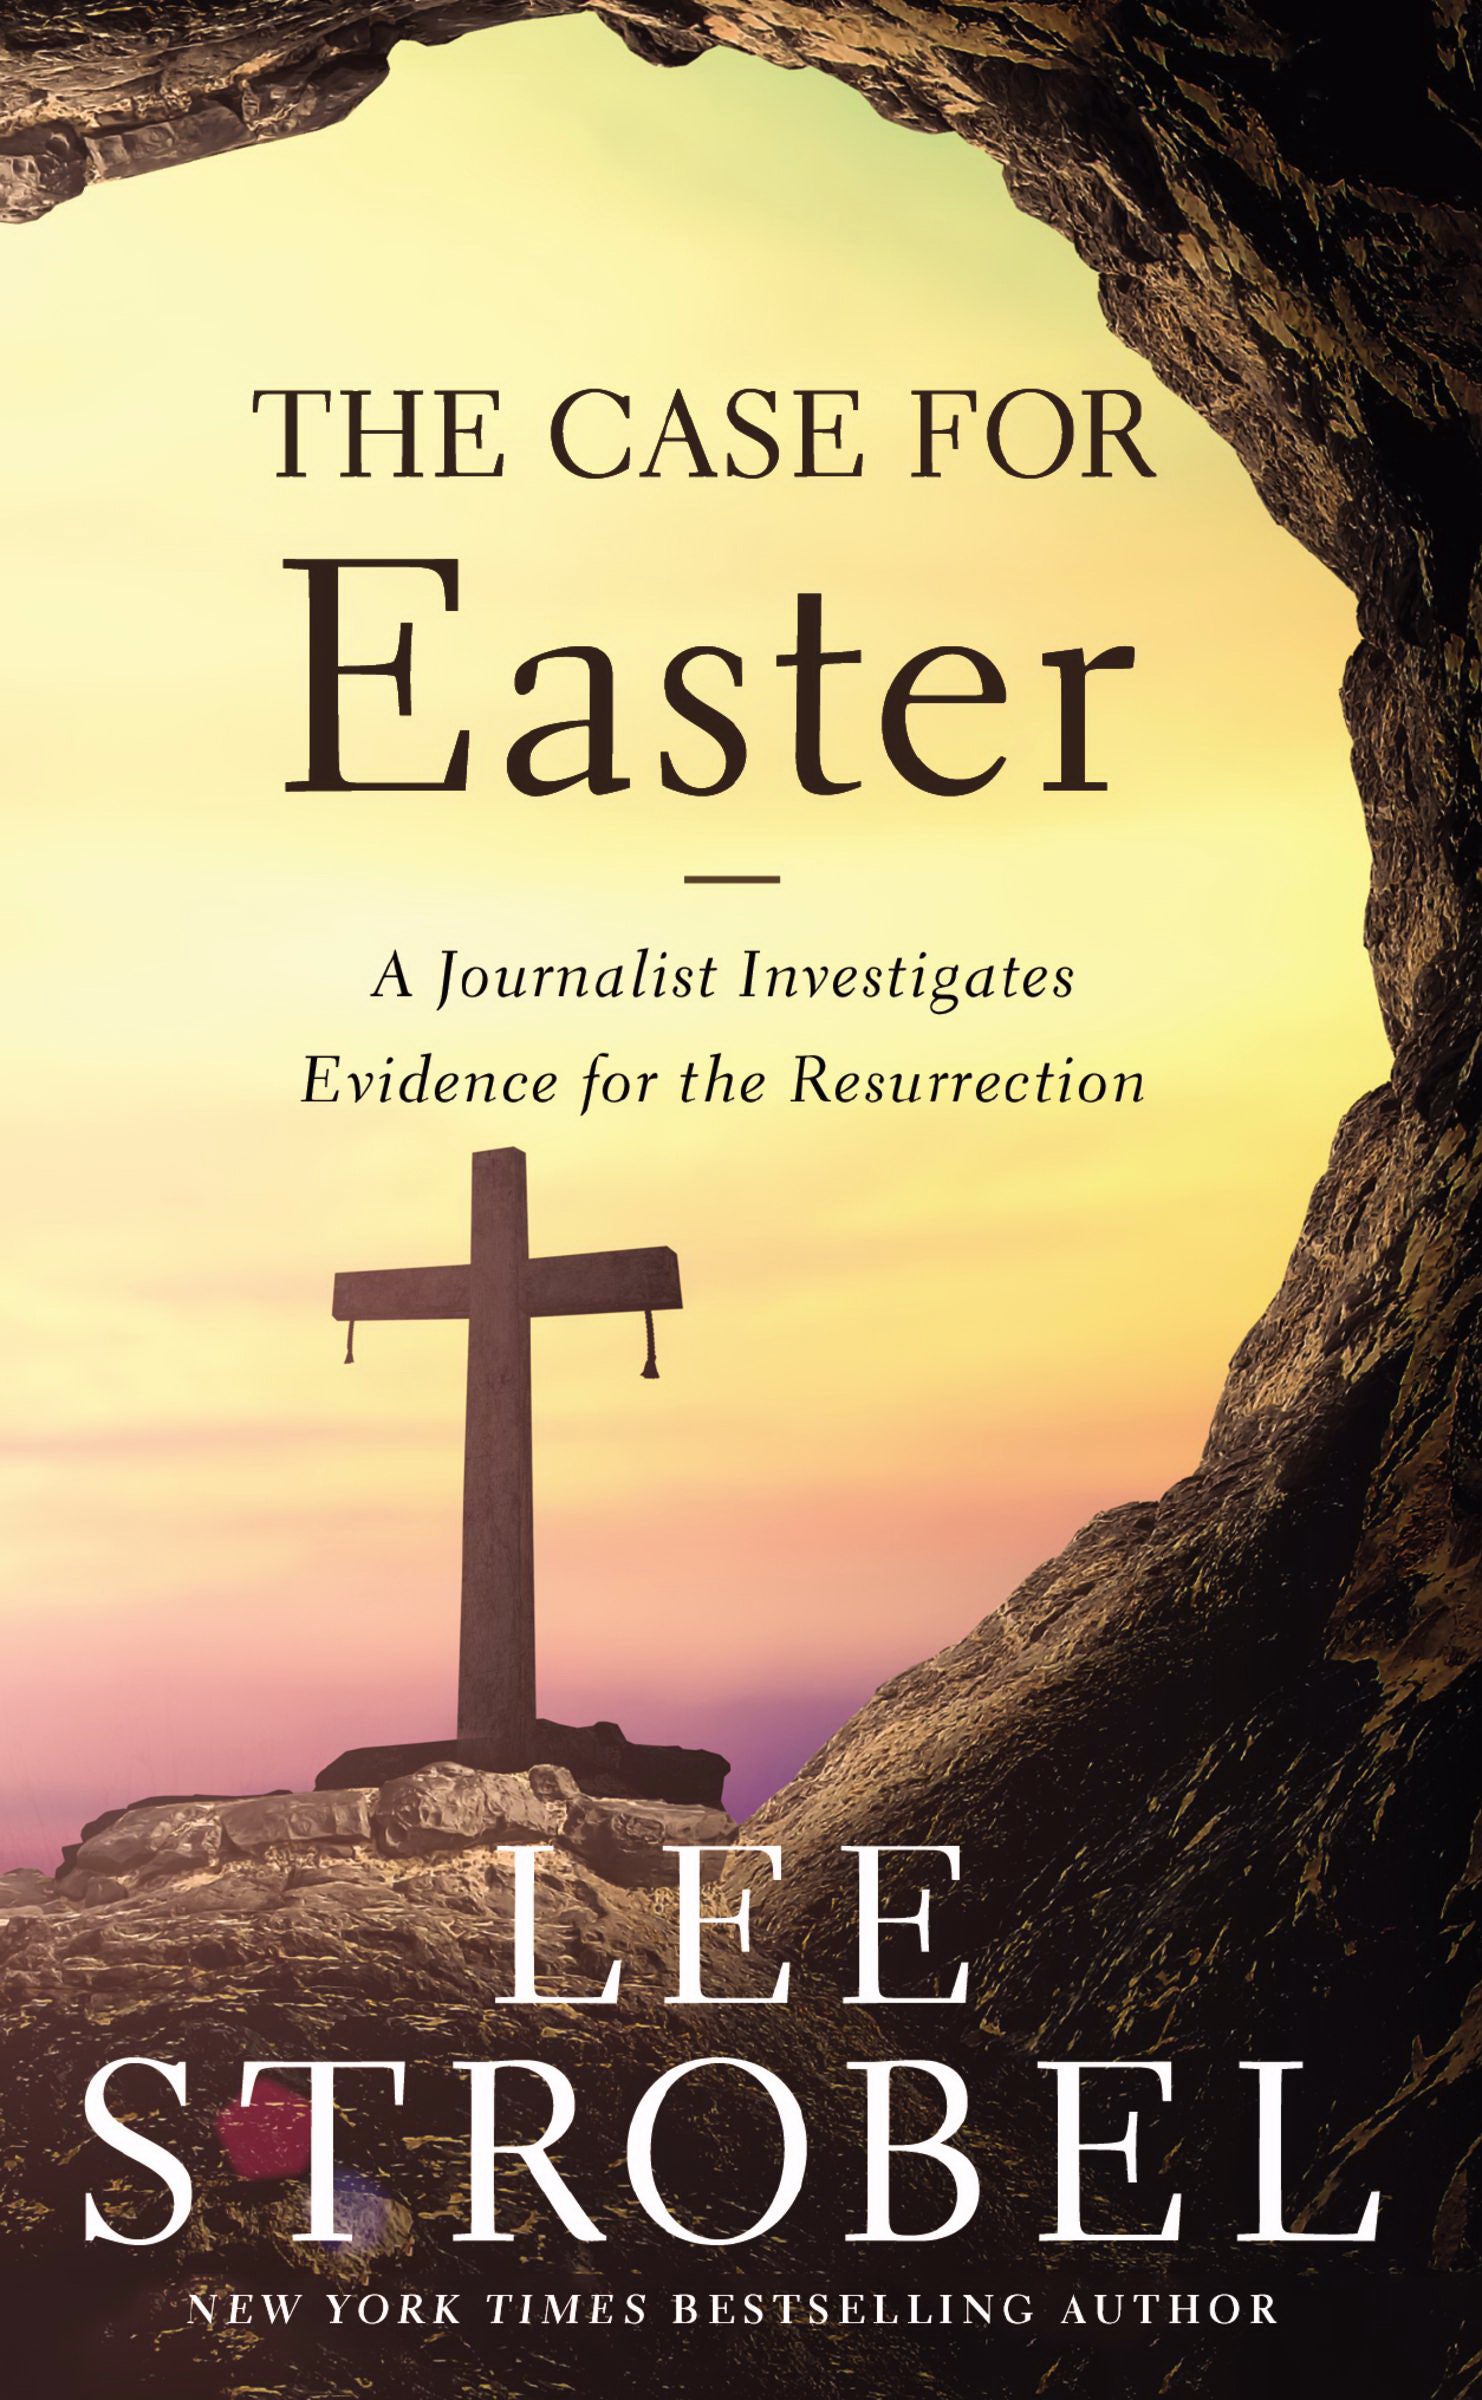 Image of The Case for Easter other